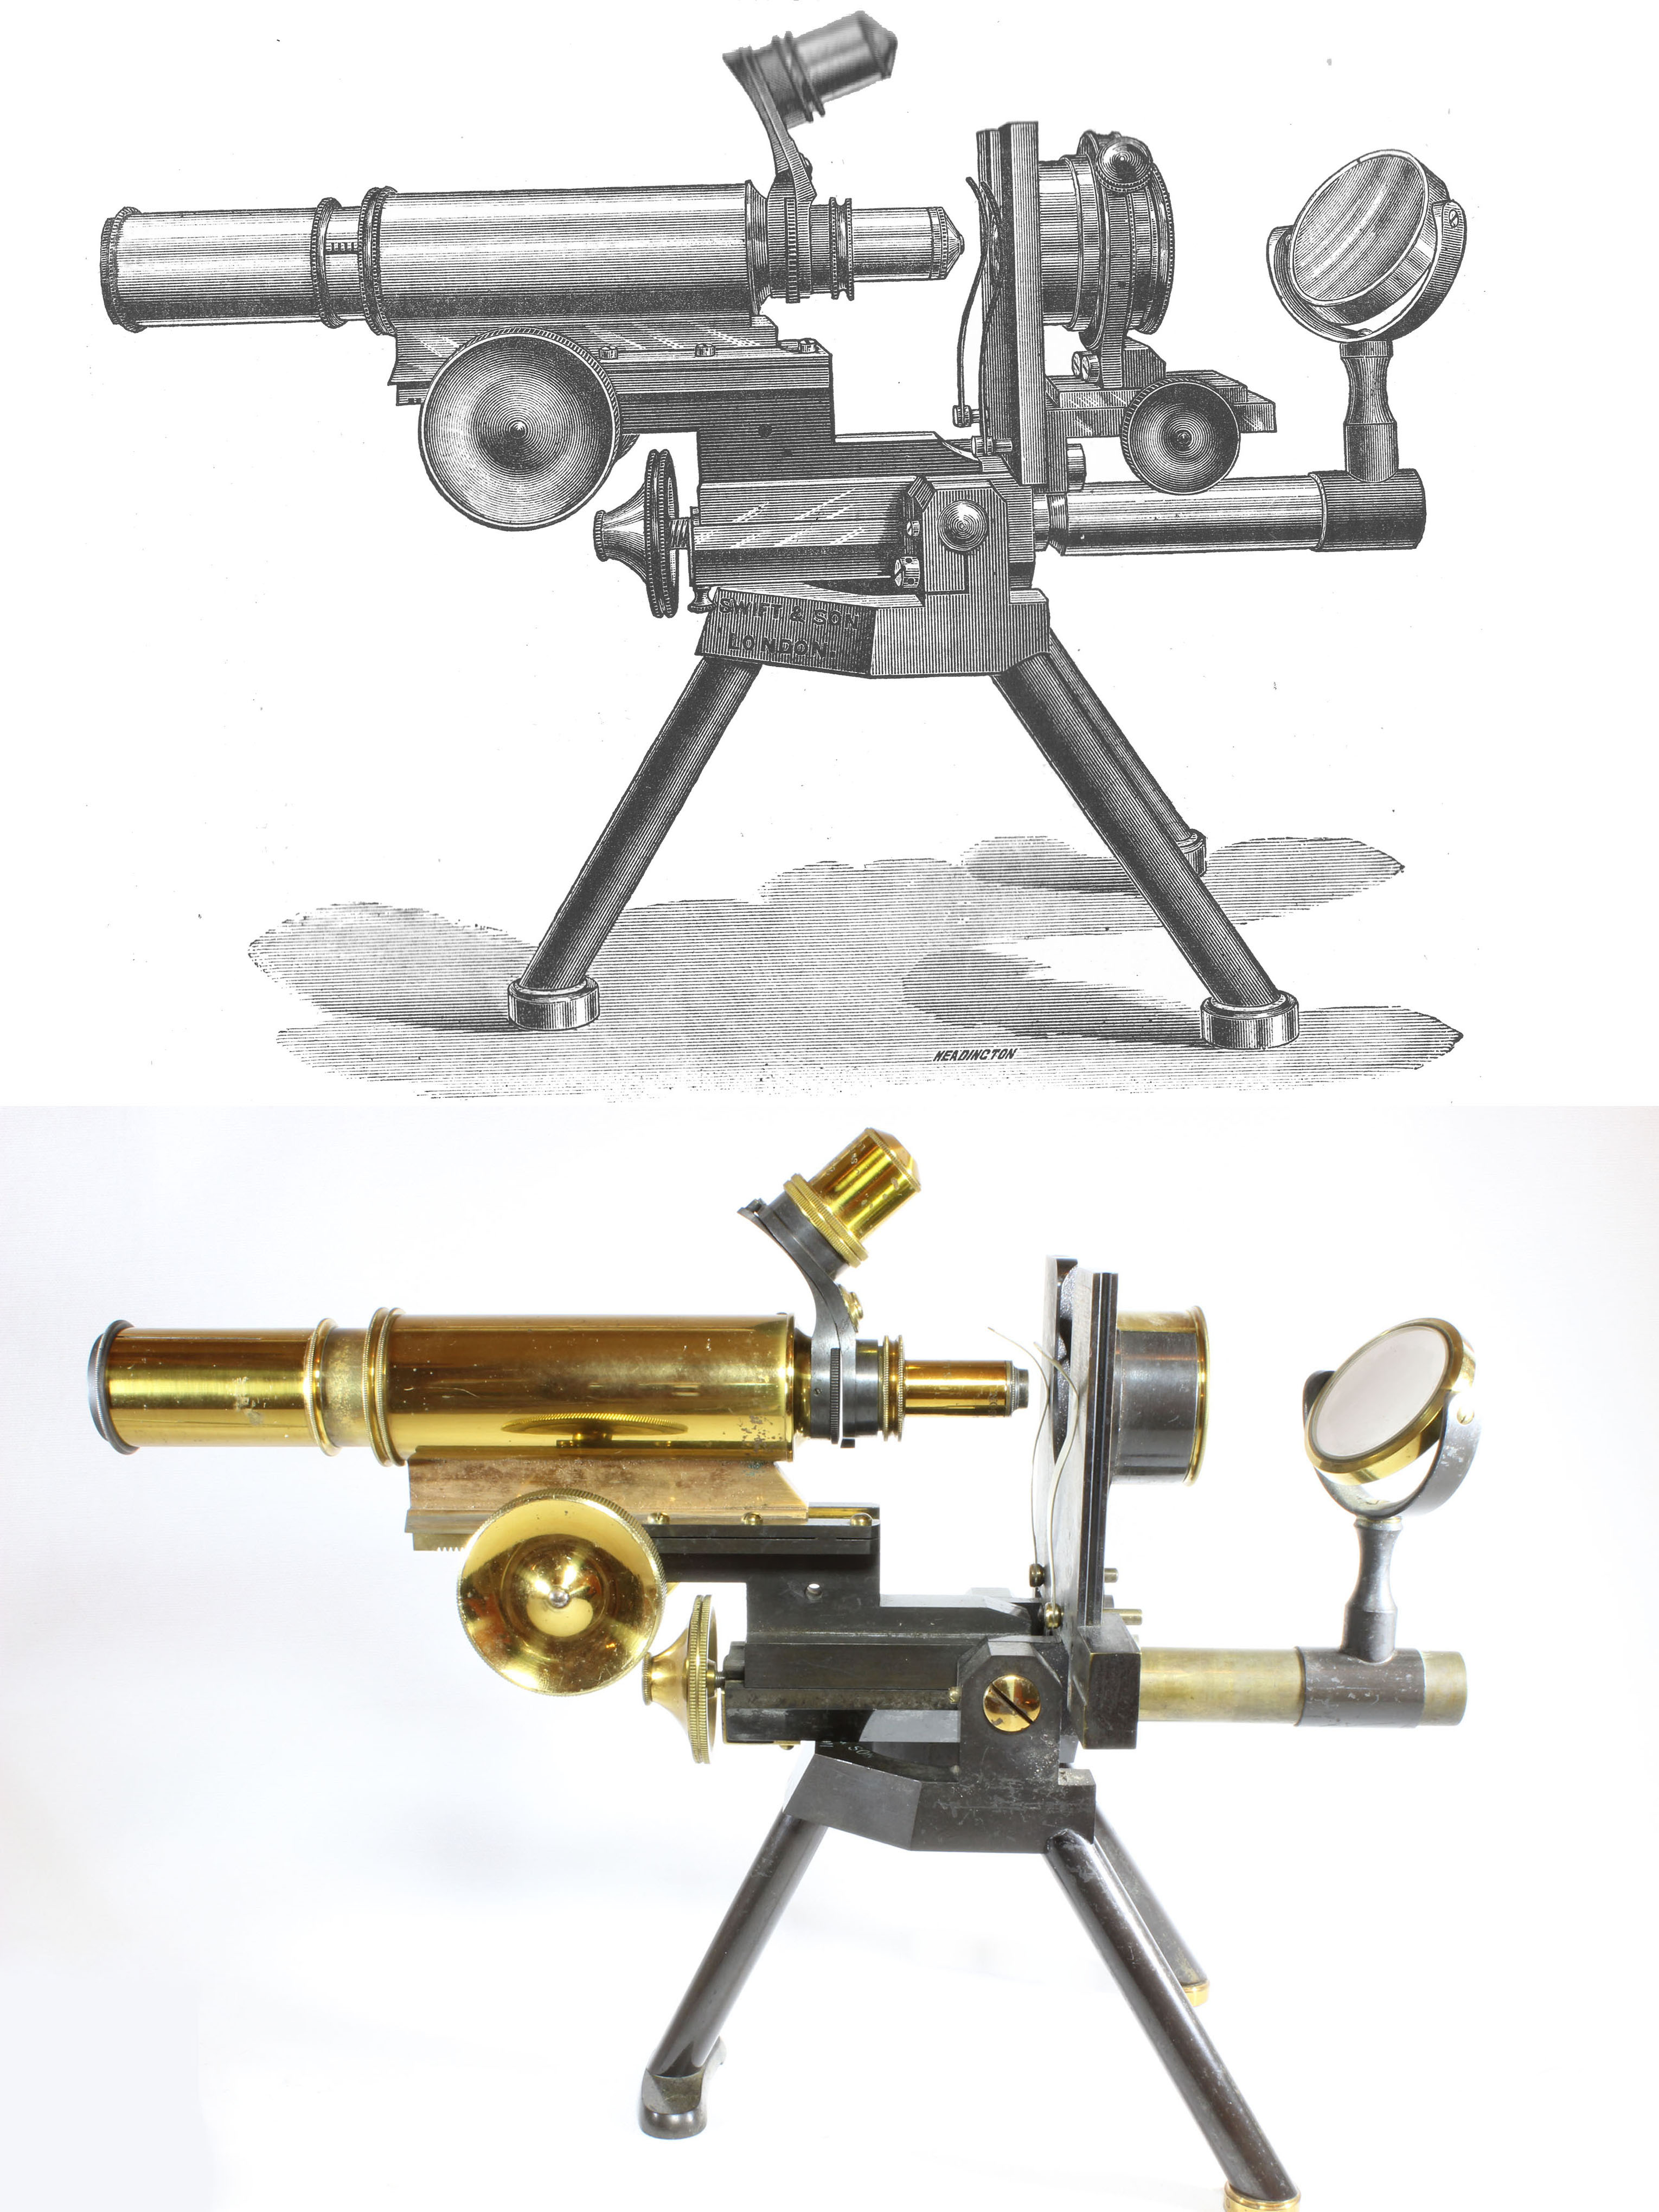 Swift New Histological and Physiological Microscope Engraving from PRMS 1894, next to actual microscope